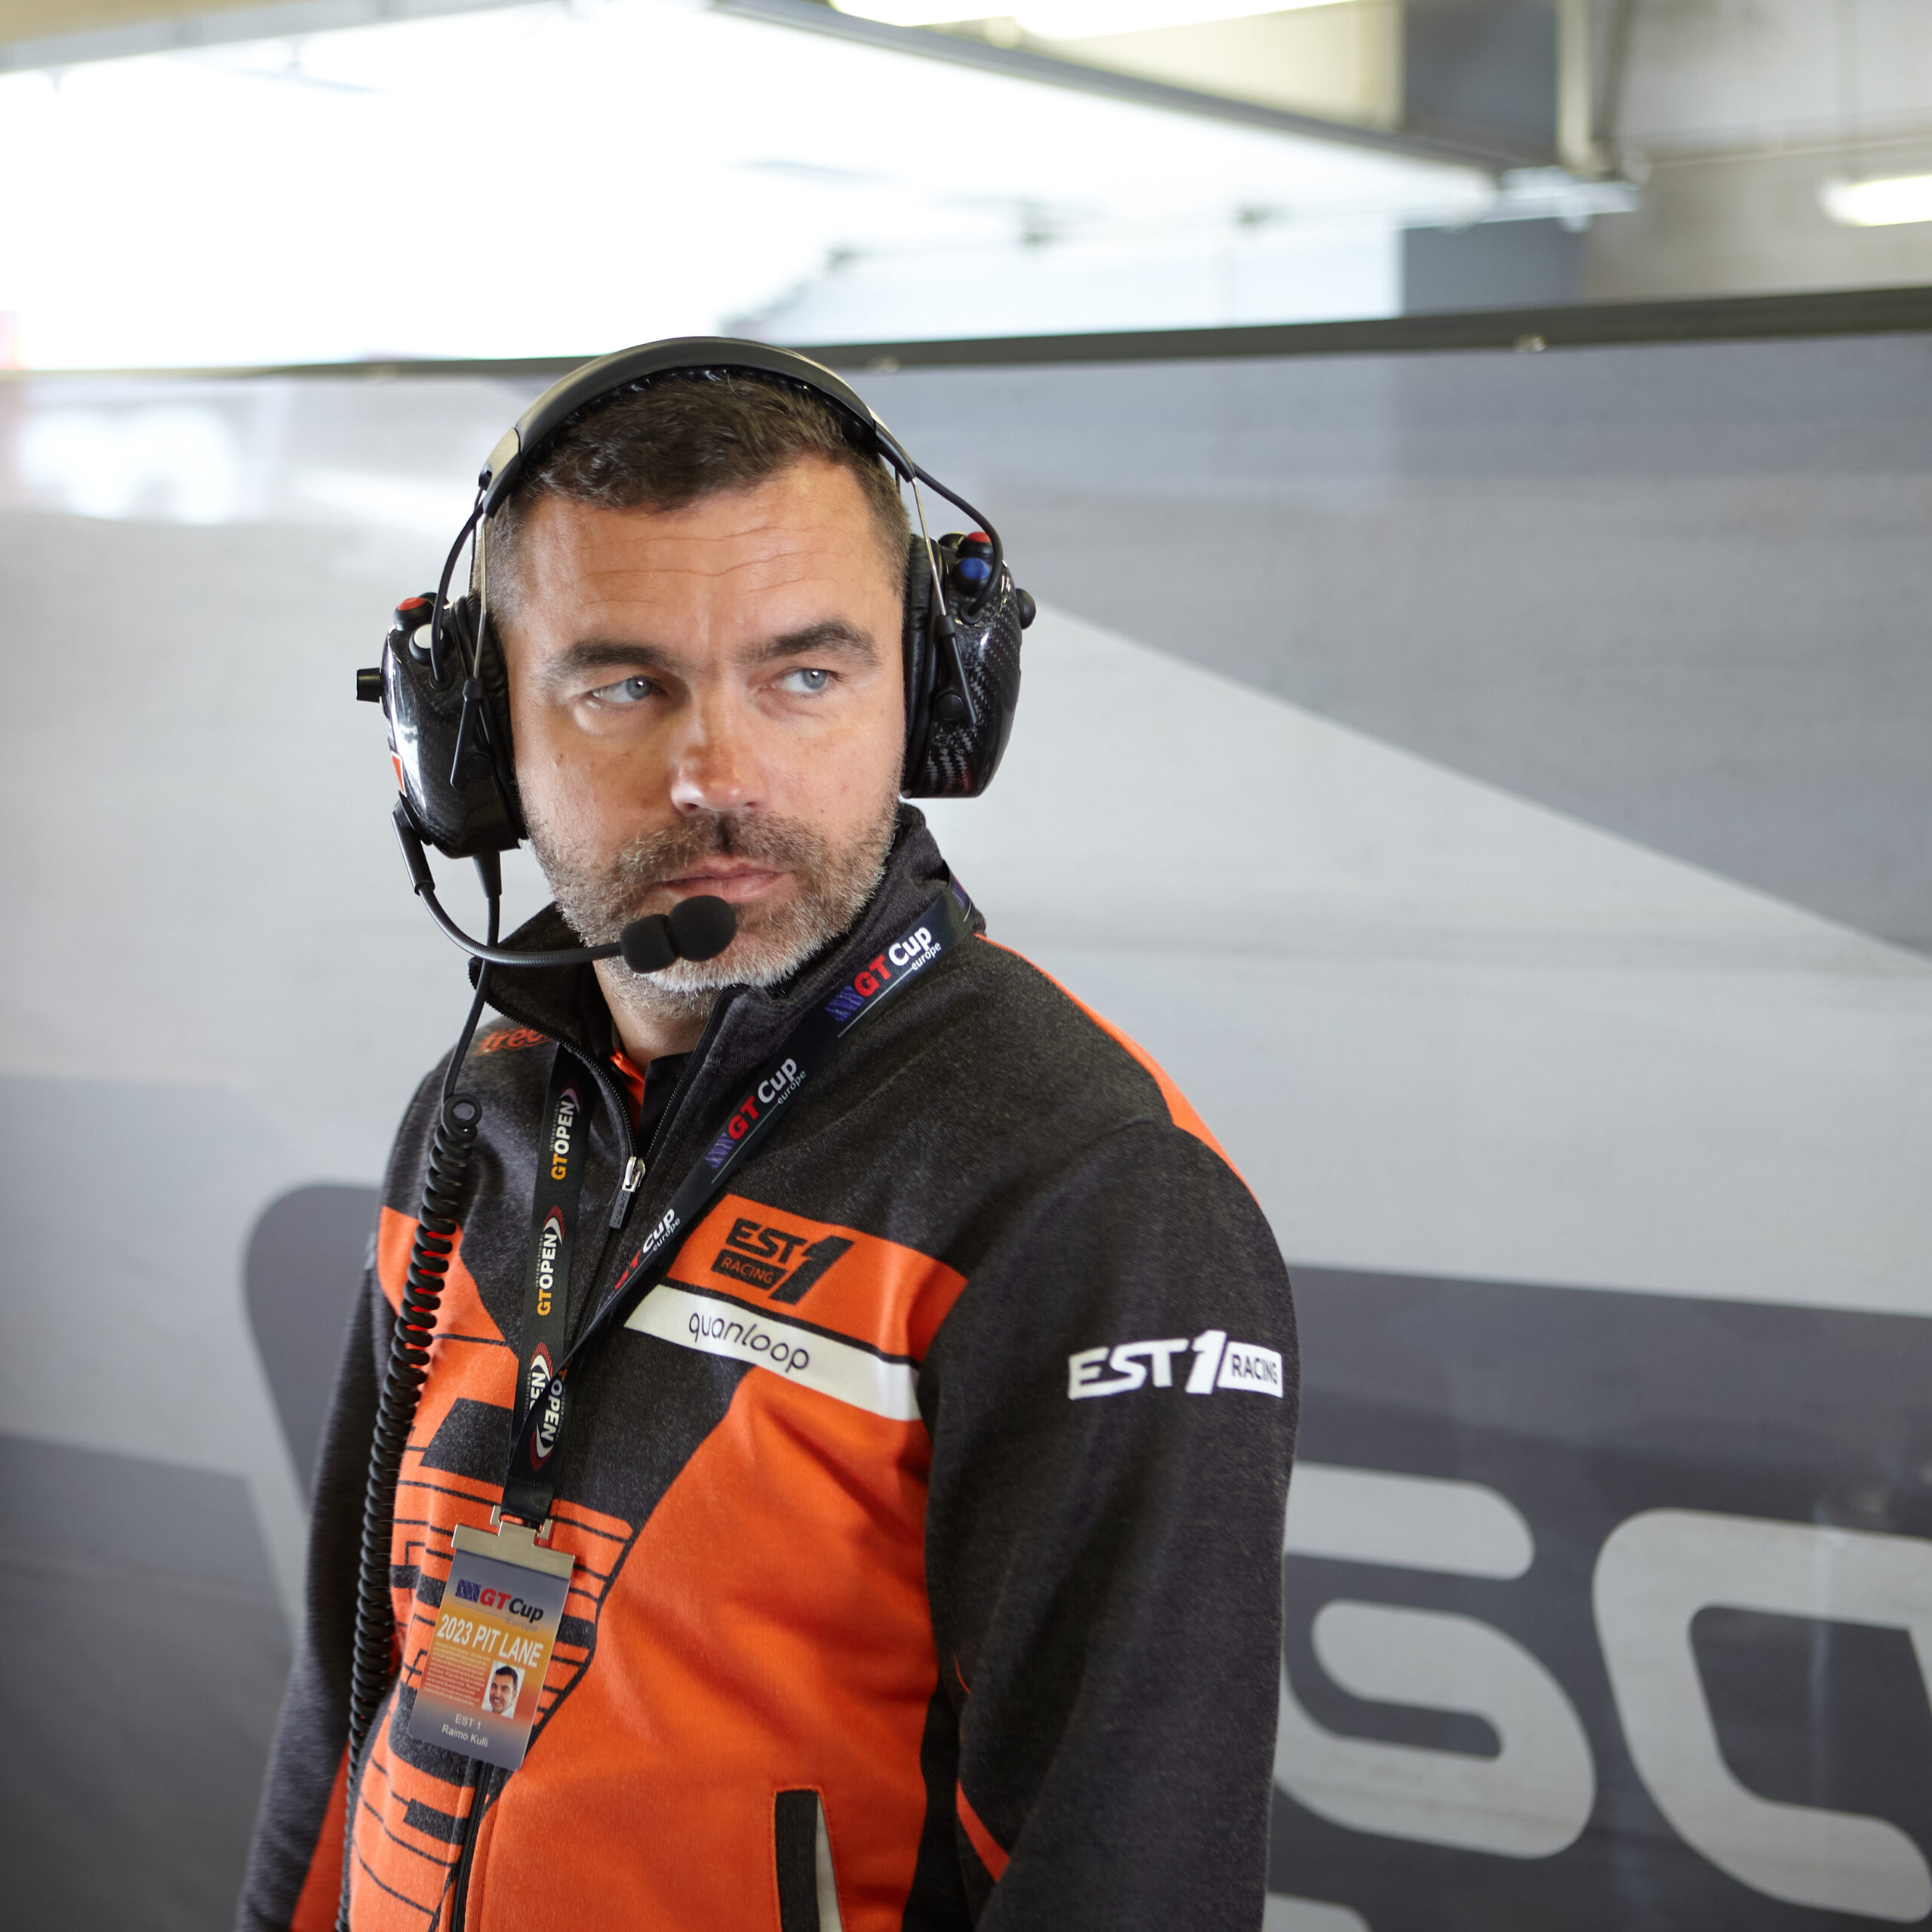 Raimo Kulli, a professional circuit racer and certified Porsche instructor